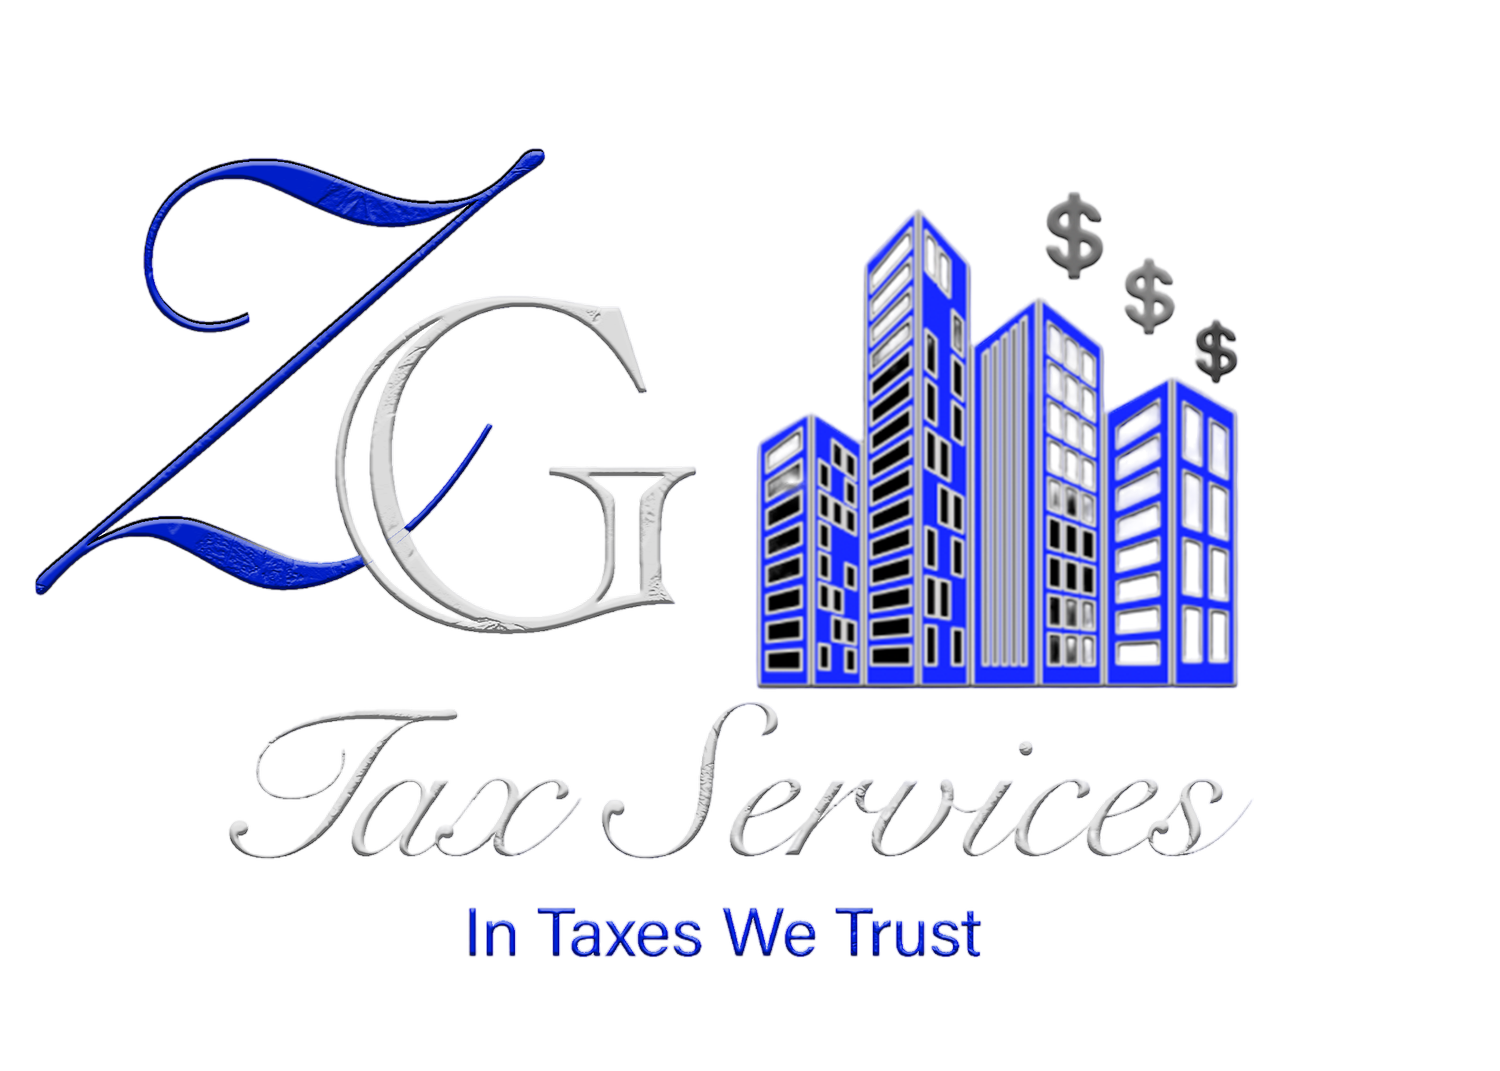 ZGTAXSERVICES